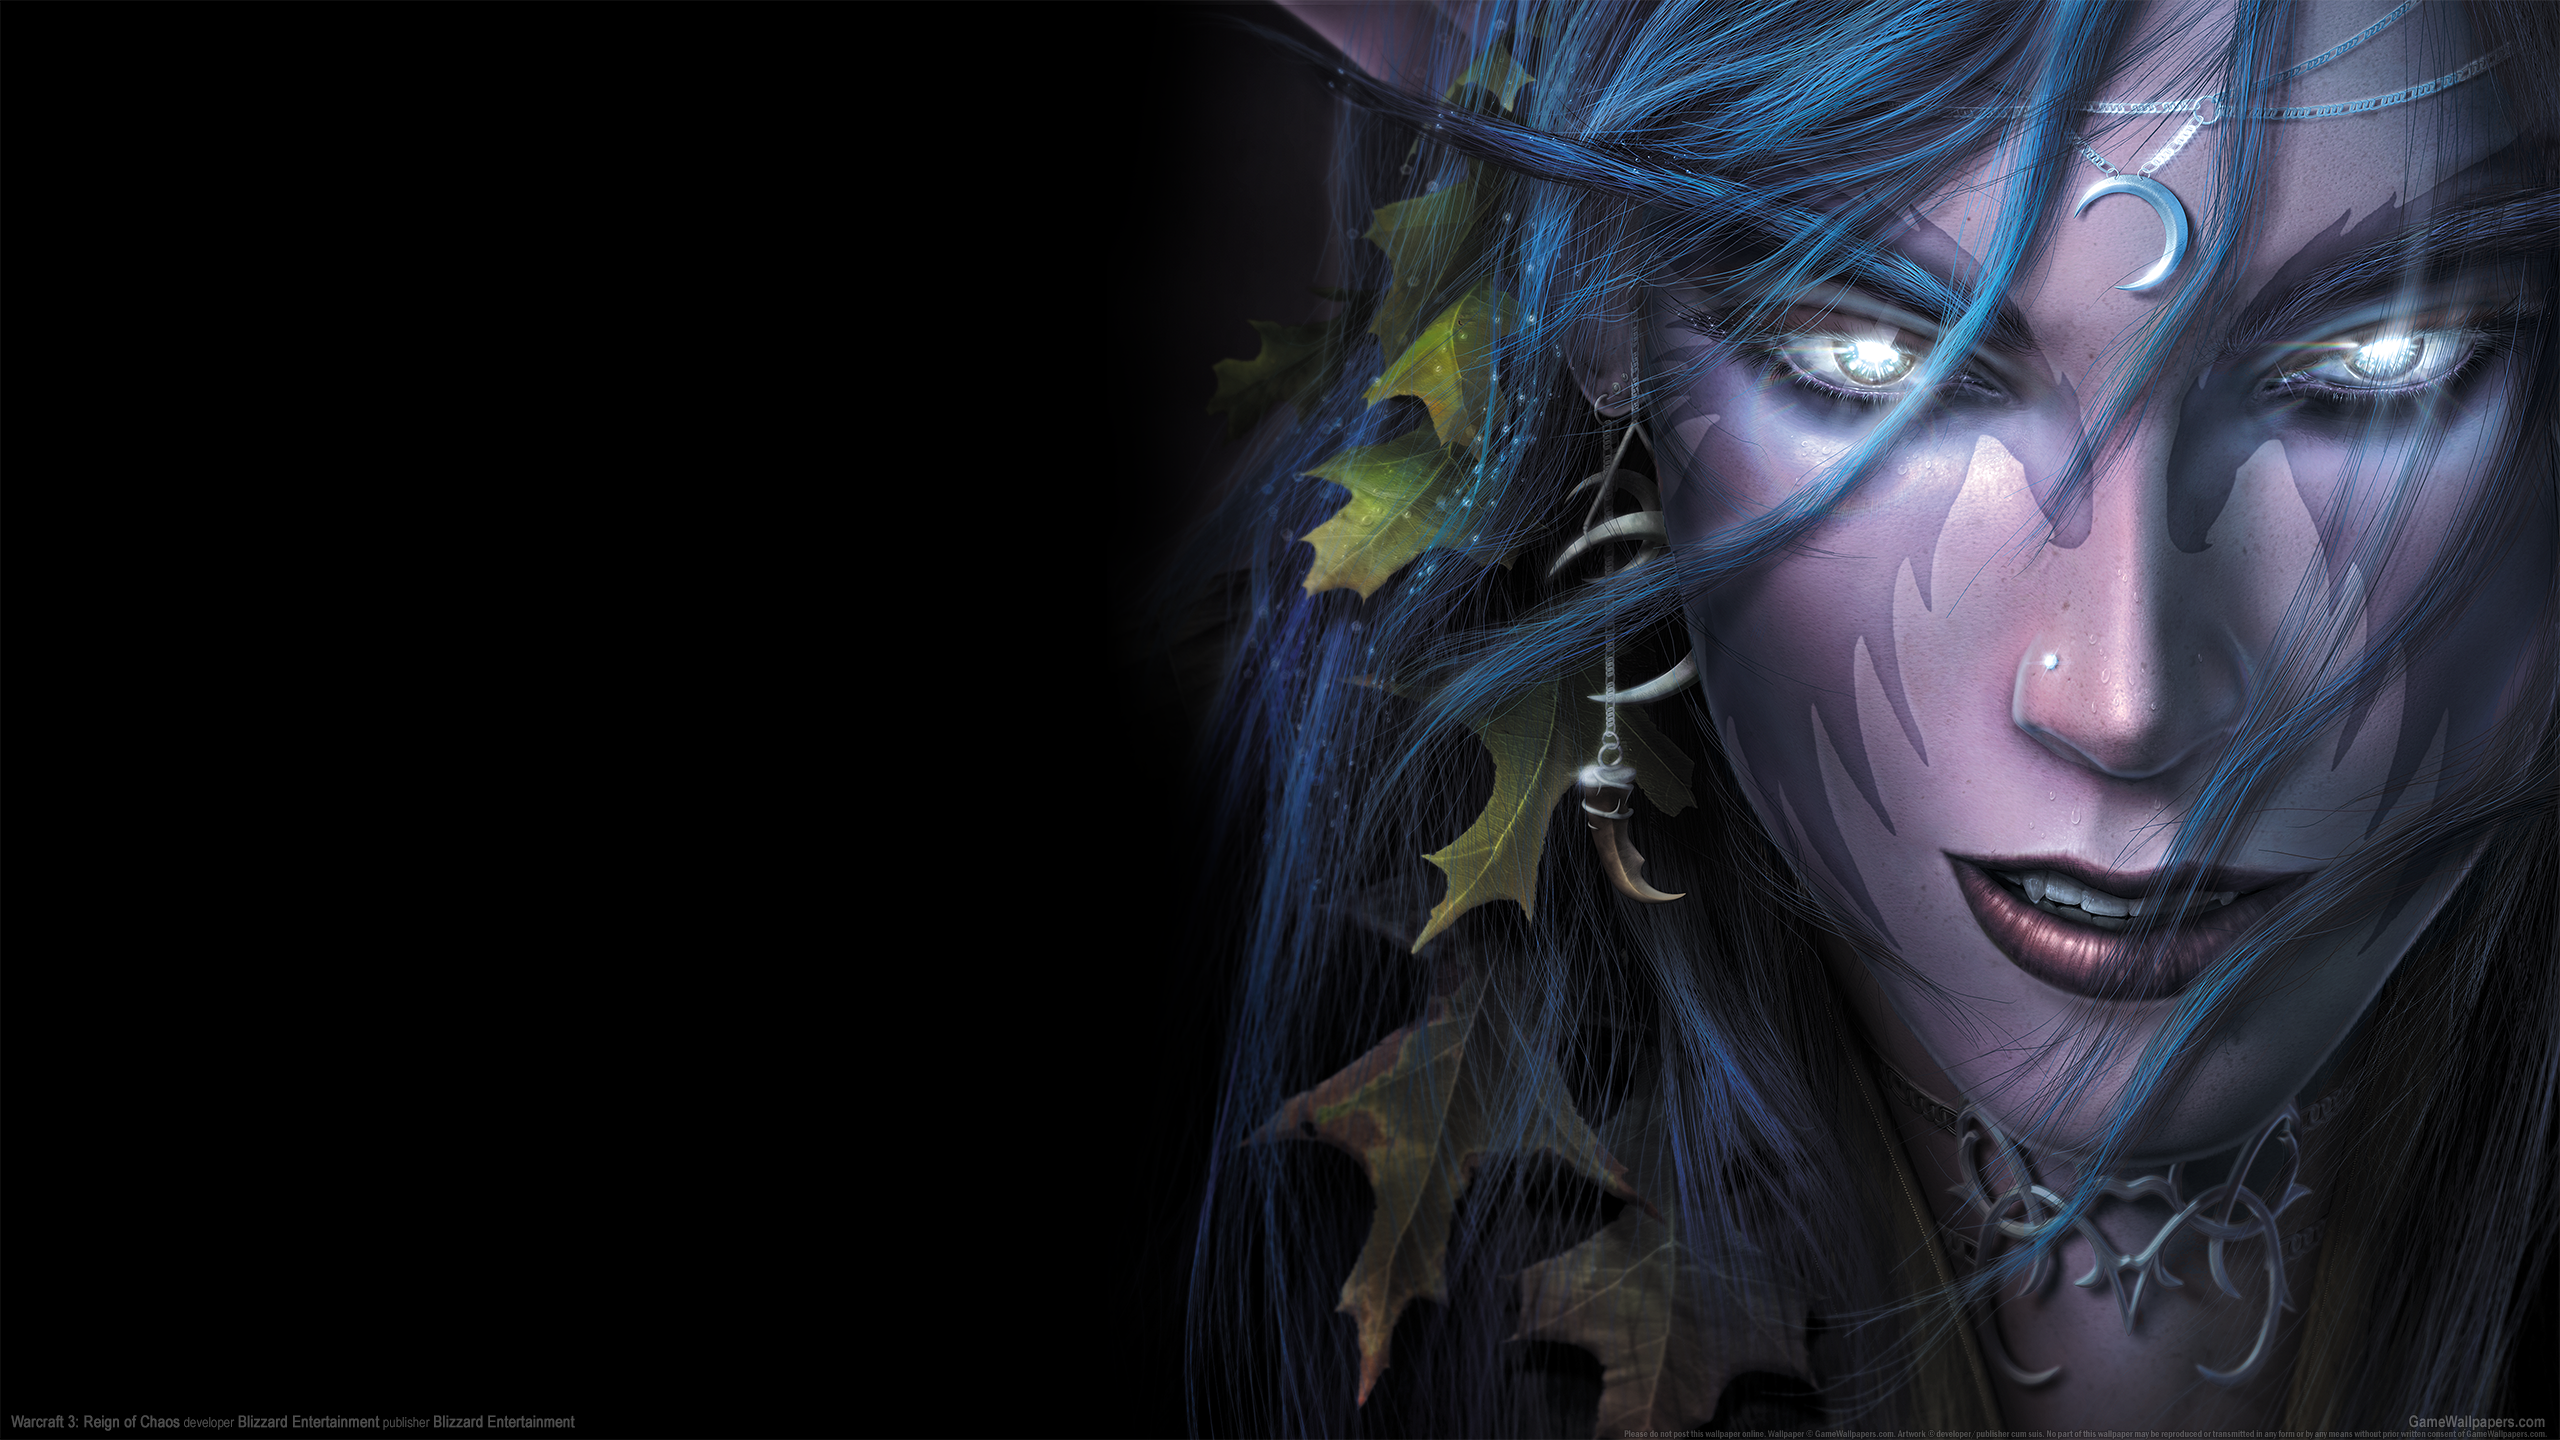 Warcraft 3: Reign of Chaos 2560x1440 wallpaper or background 23